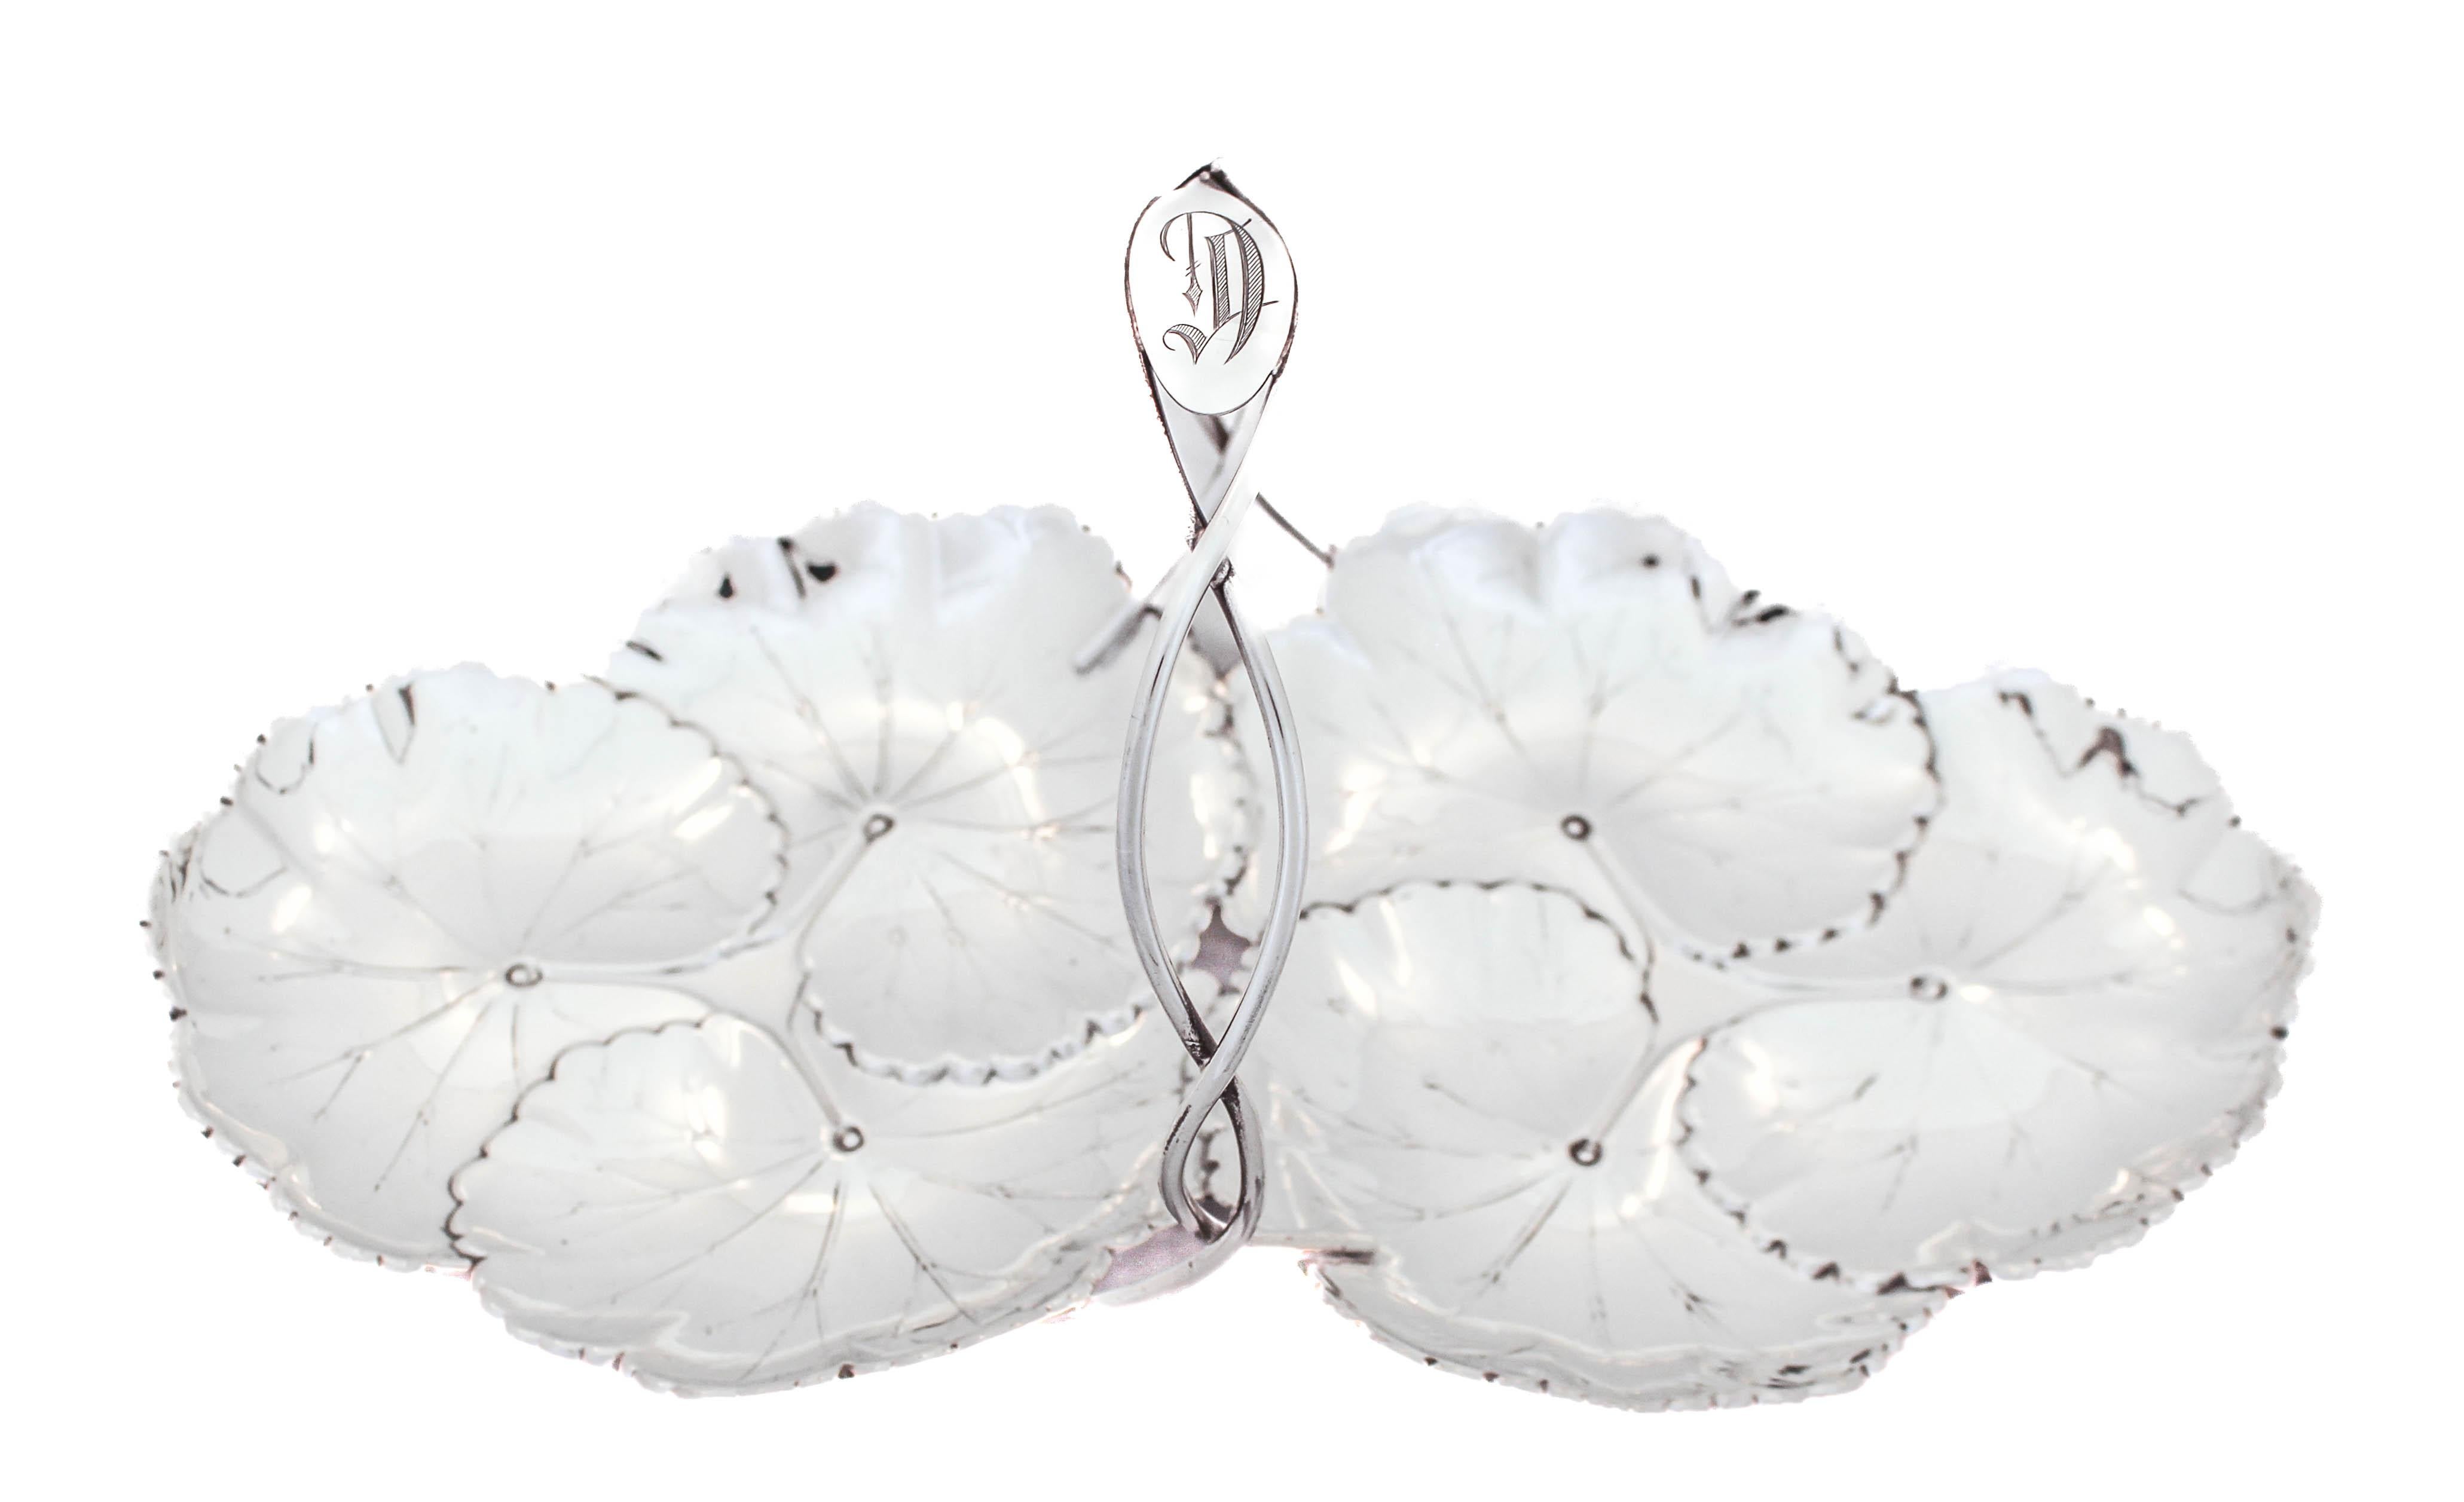 Being offered is a sterling silver double-dish with a handle.  This piece is manufactured by Reed & Barton and hallmarked 1941.  It has an Art Nouveau design with its scalloped rim and water lilies motif.  The handle in the center has a braided